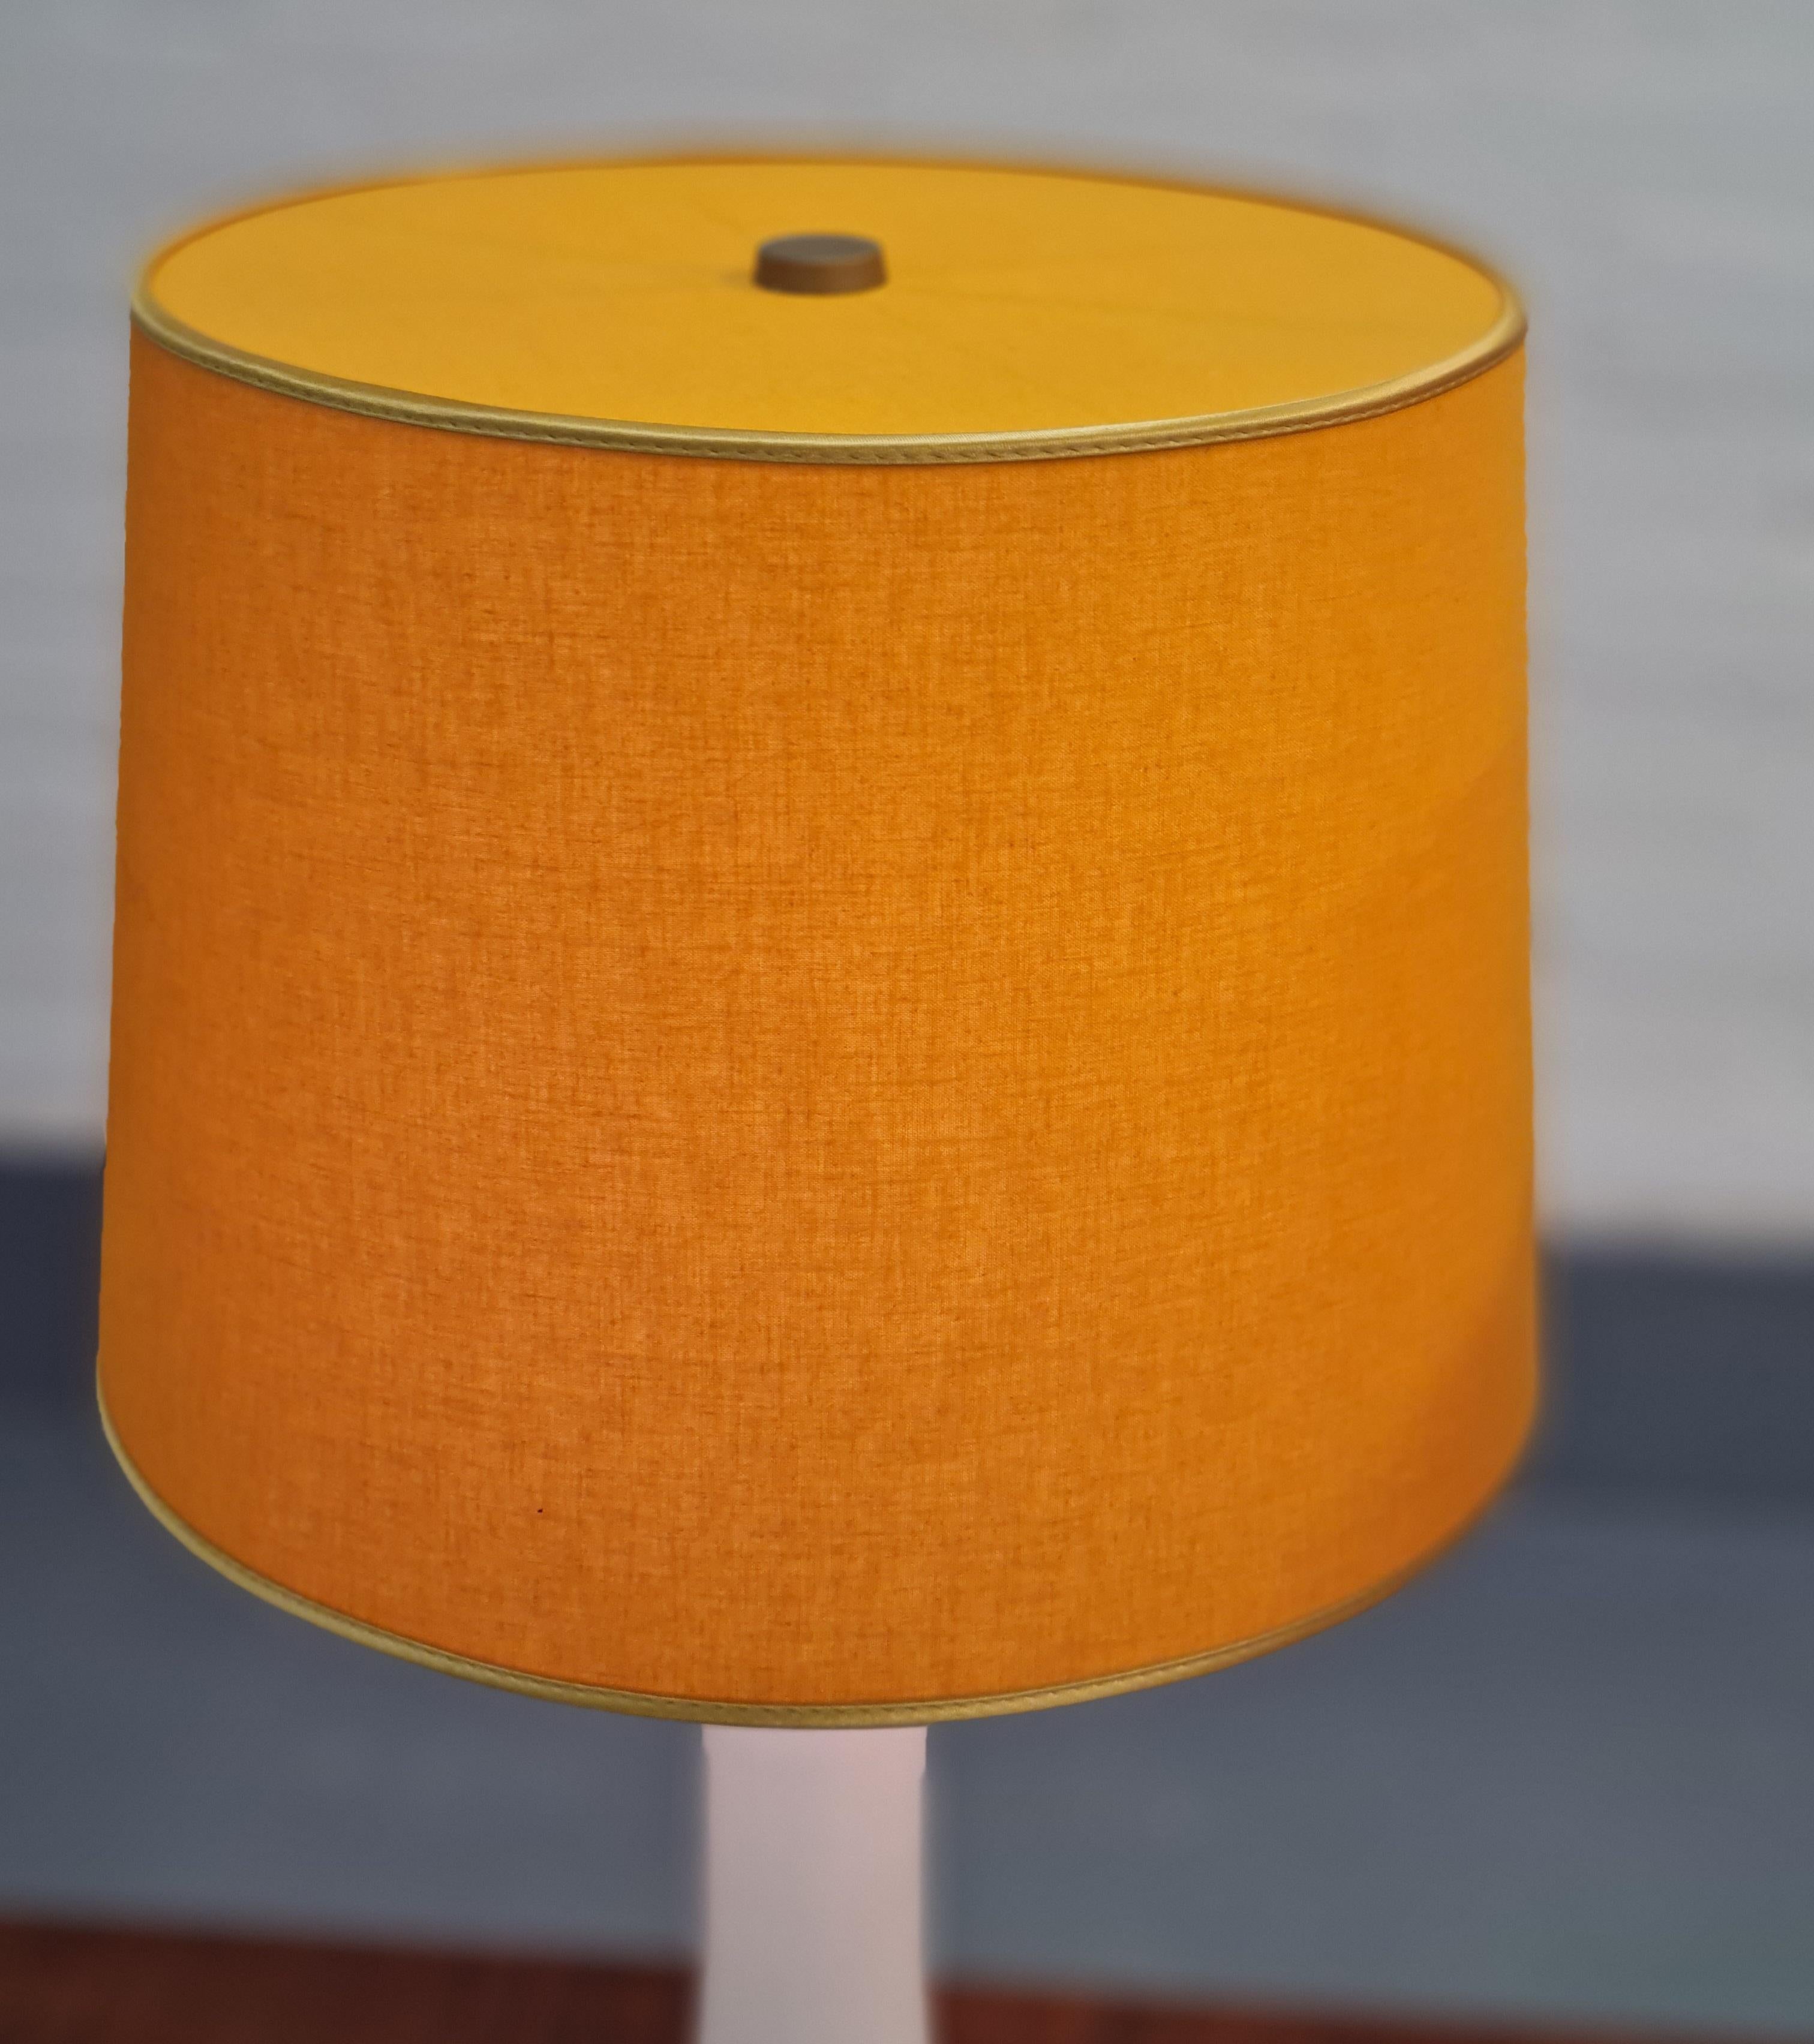 Pair of Lisa Johansson-Pape Table Lamps Model 46-017, for Orno 1